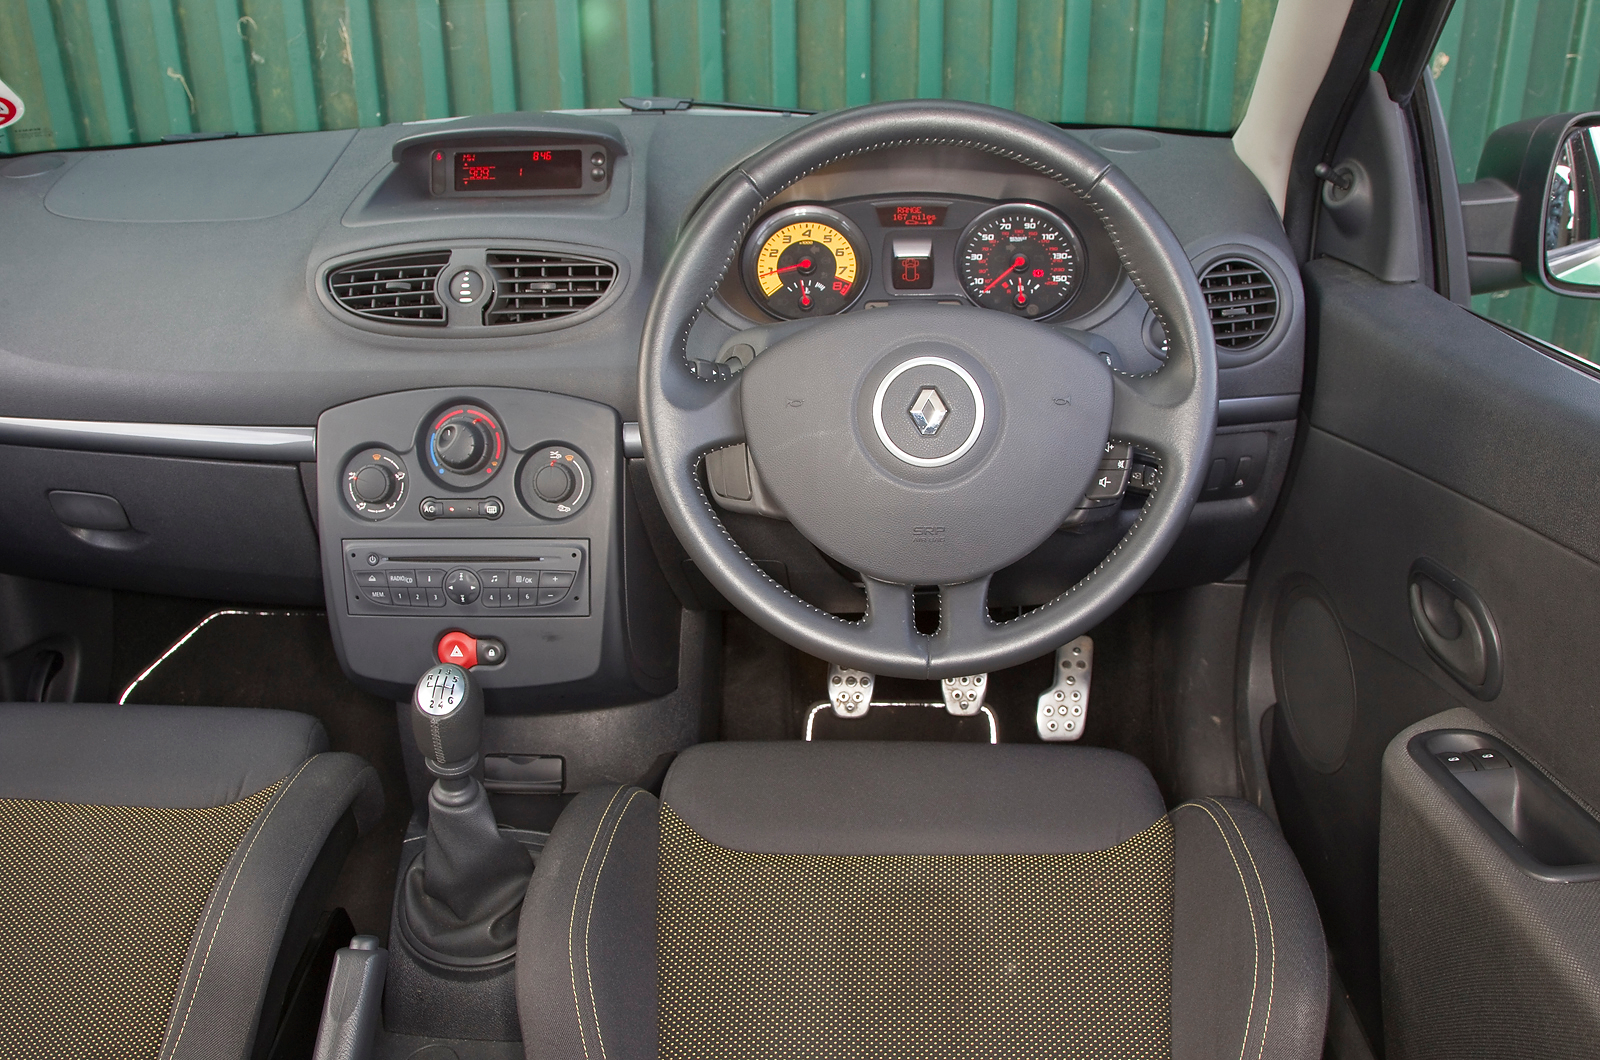 Renault Clio RS dashboard